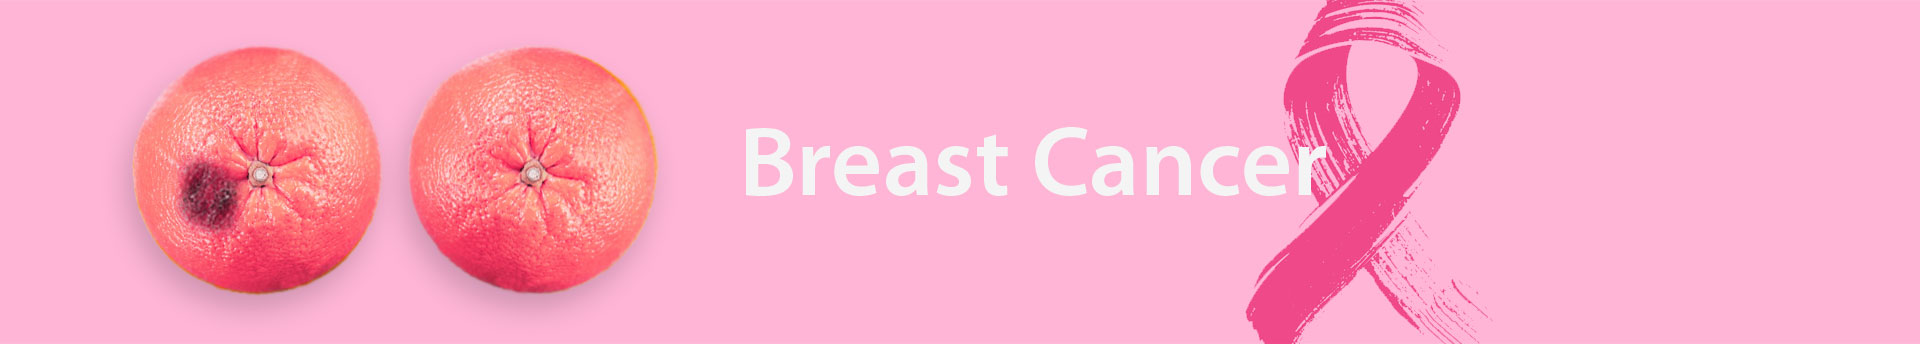 Medicaoncology Breast Cancer